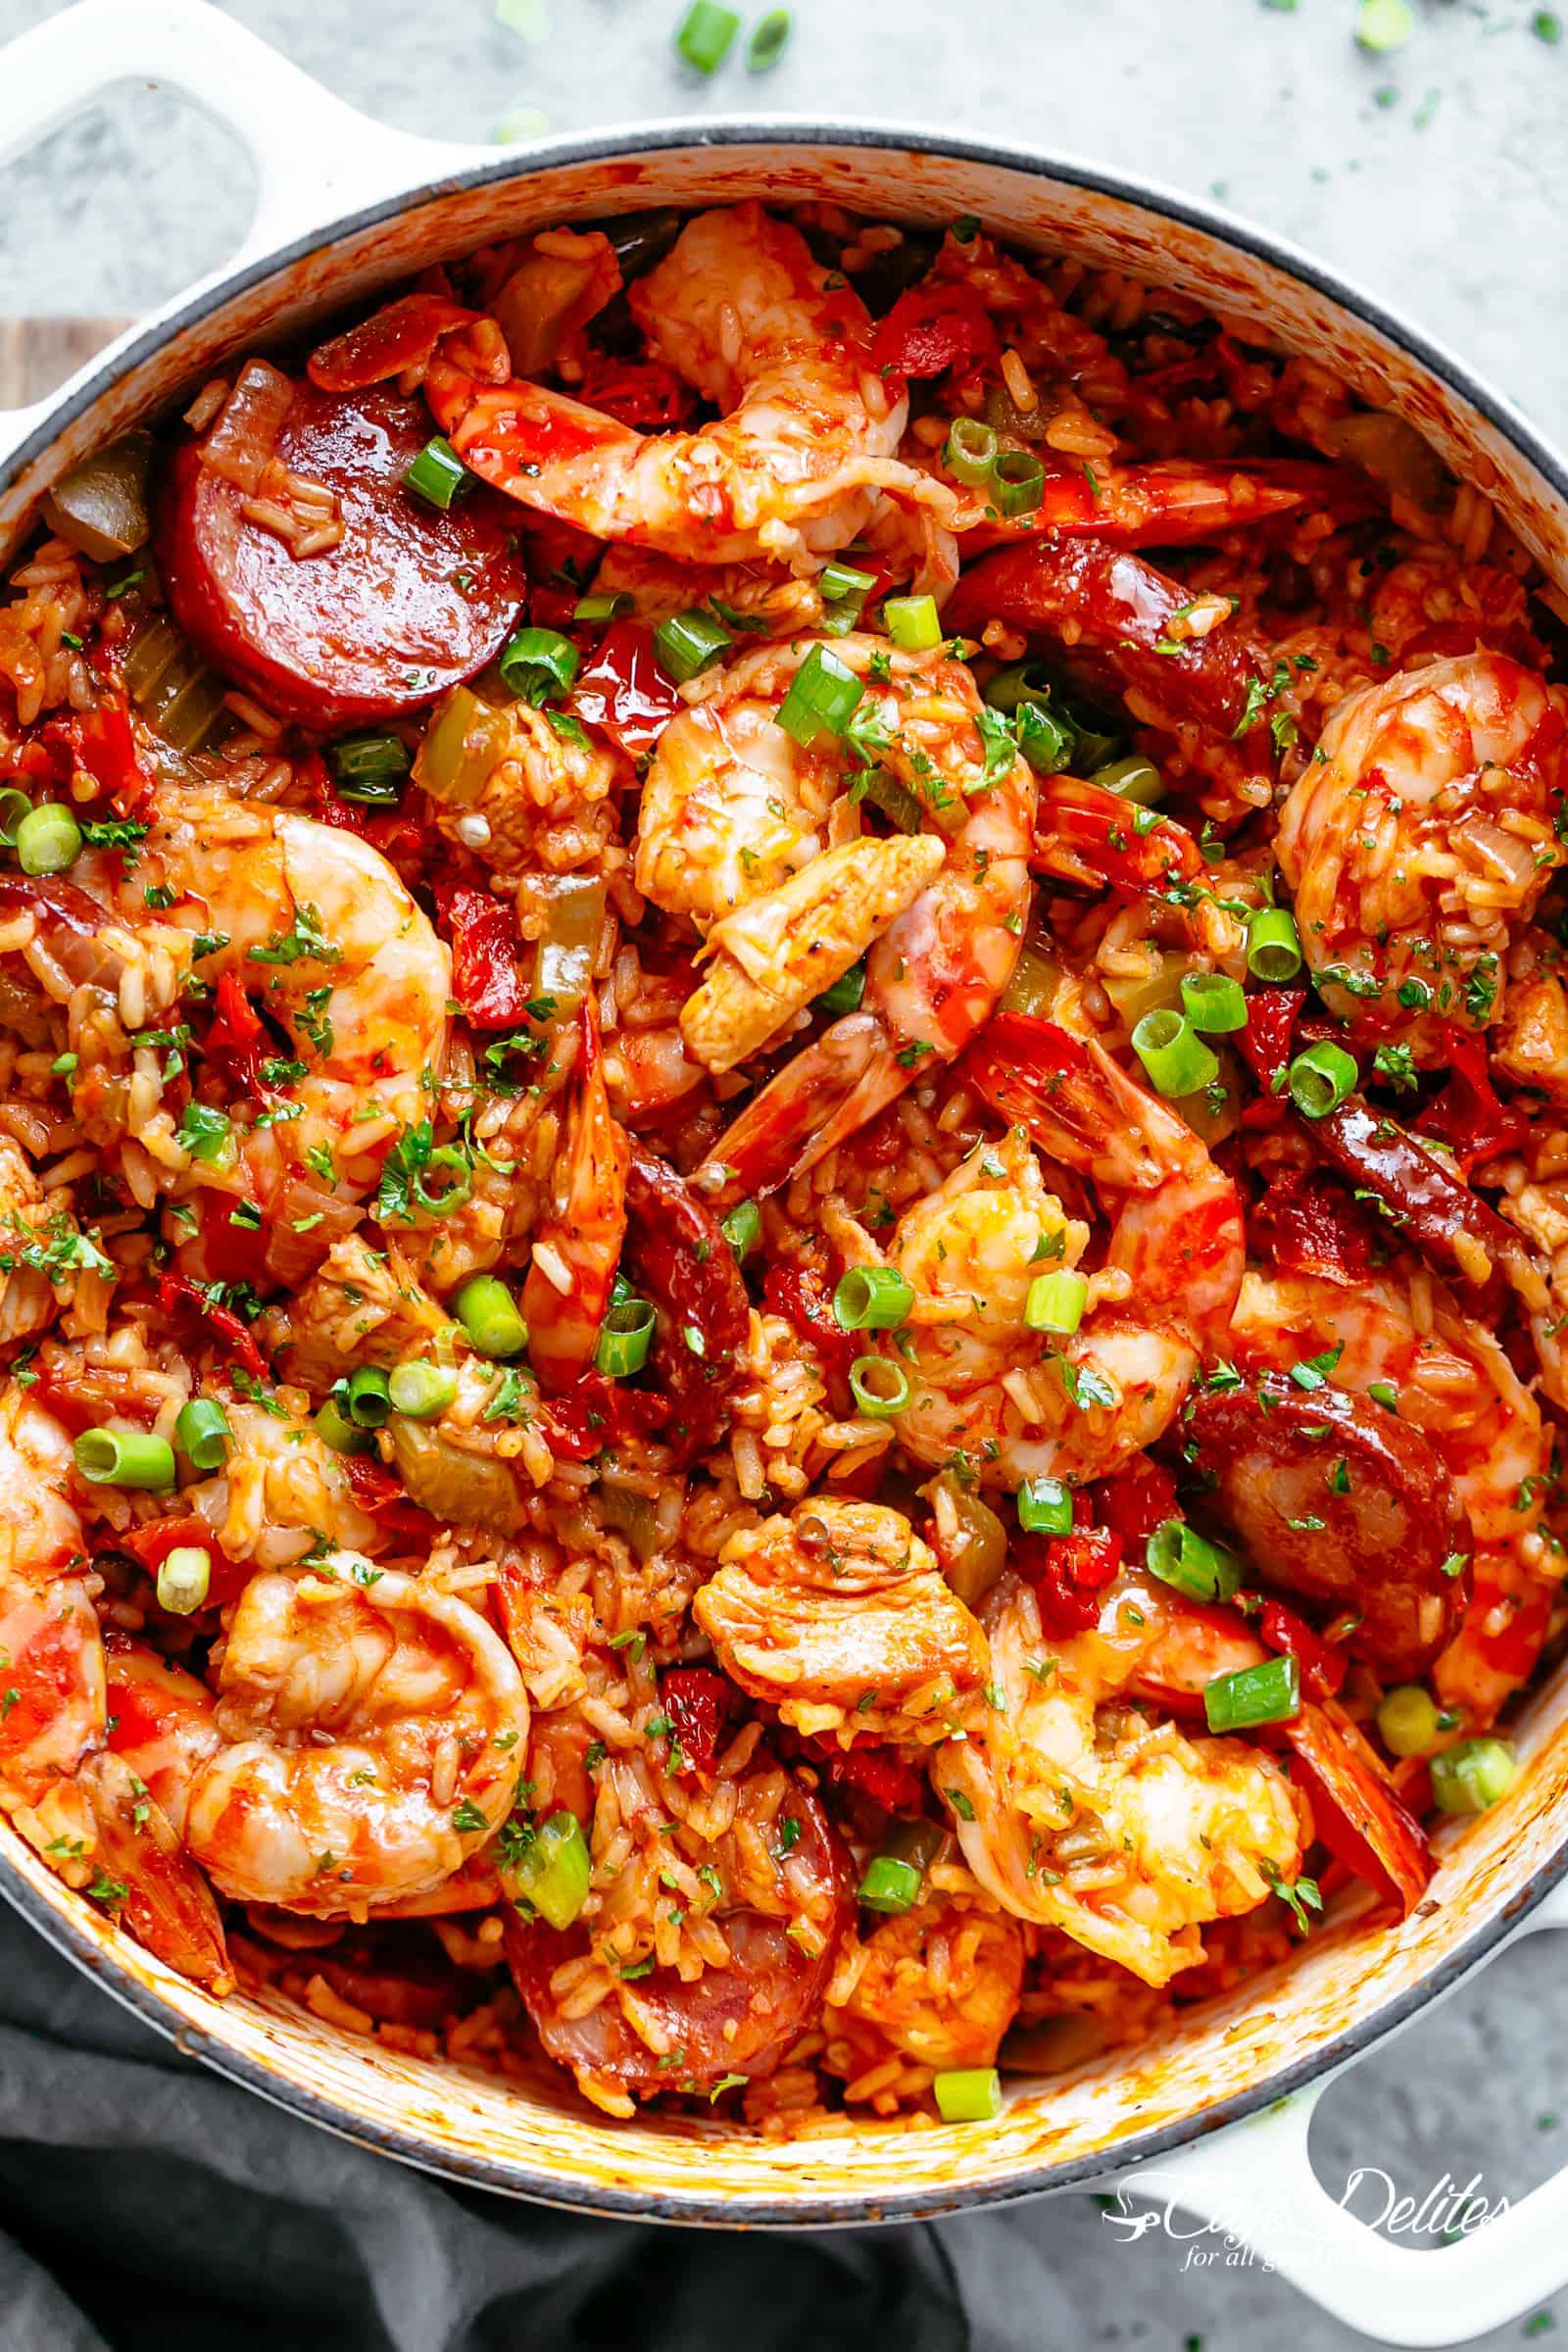 An authentic Creole Jambalaya recipe! A delicious one-pot meal brought to you from New Orleans is pure comfort food packed with chicken, shrimp, andouille sausage, rice, seasonings, spices, and incredible flavors! Ready and on the table in 45 minutes! | cafedelites.com